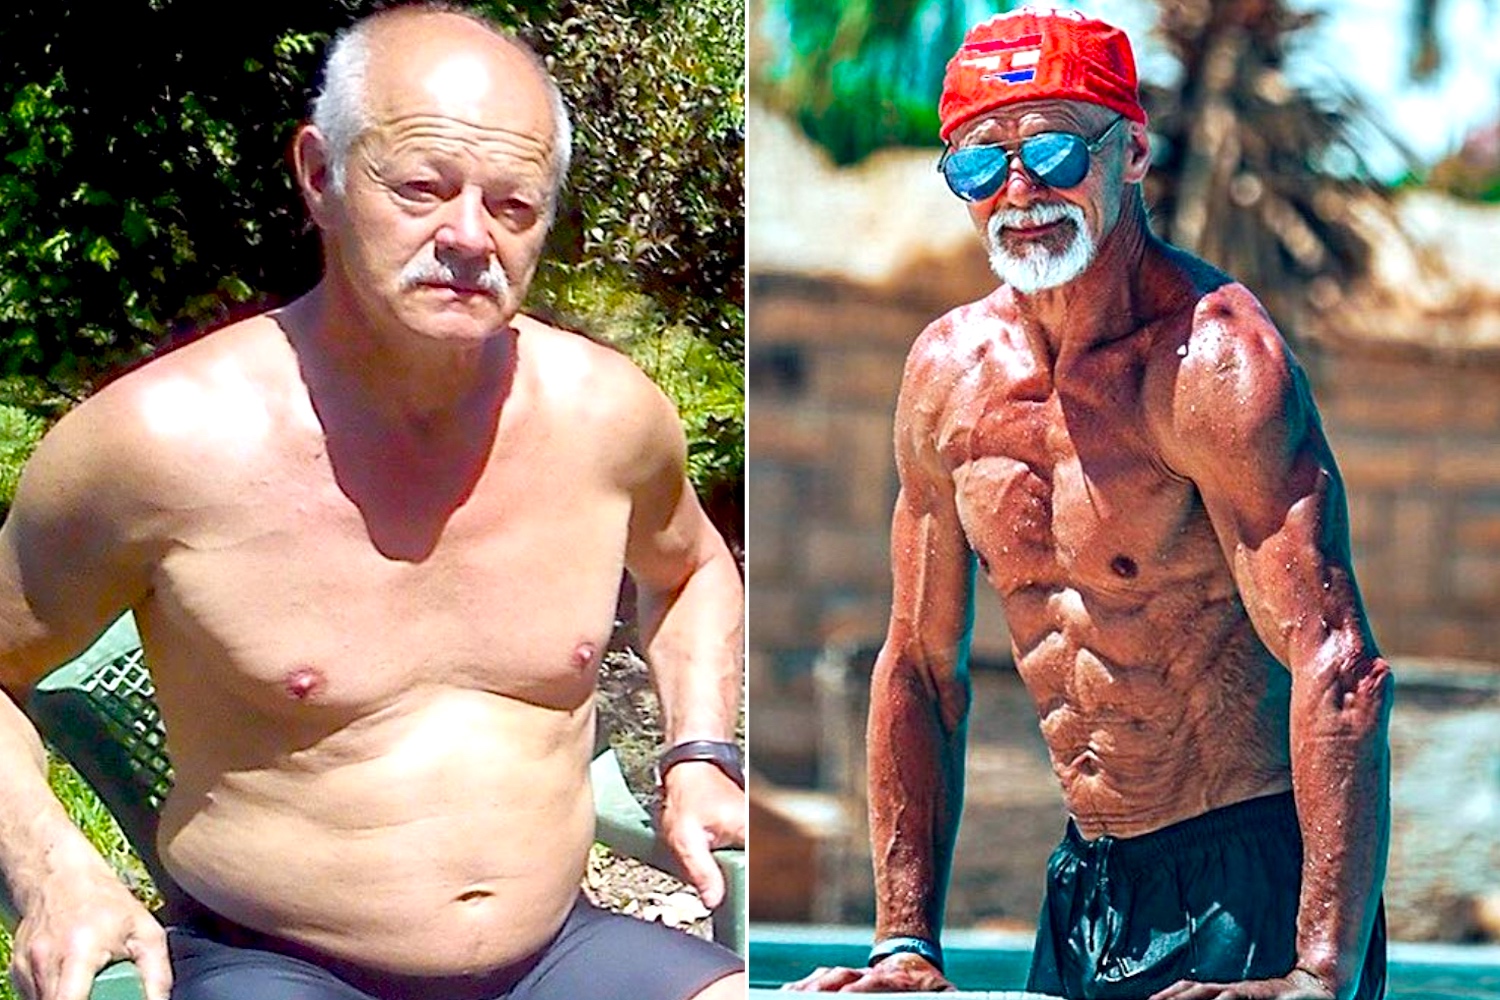 Fitness coach reveals body's drastic changes throughout day